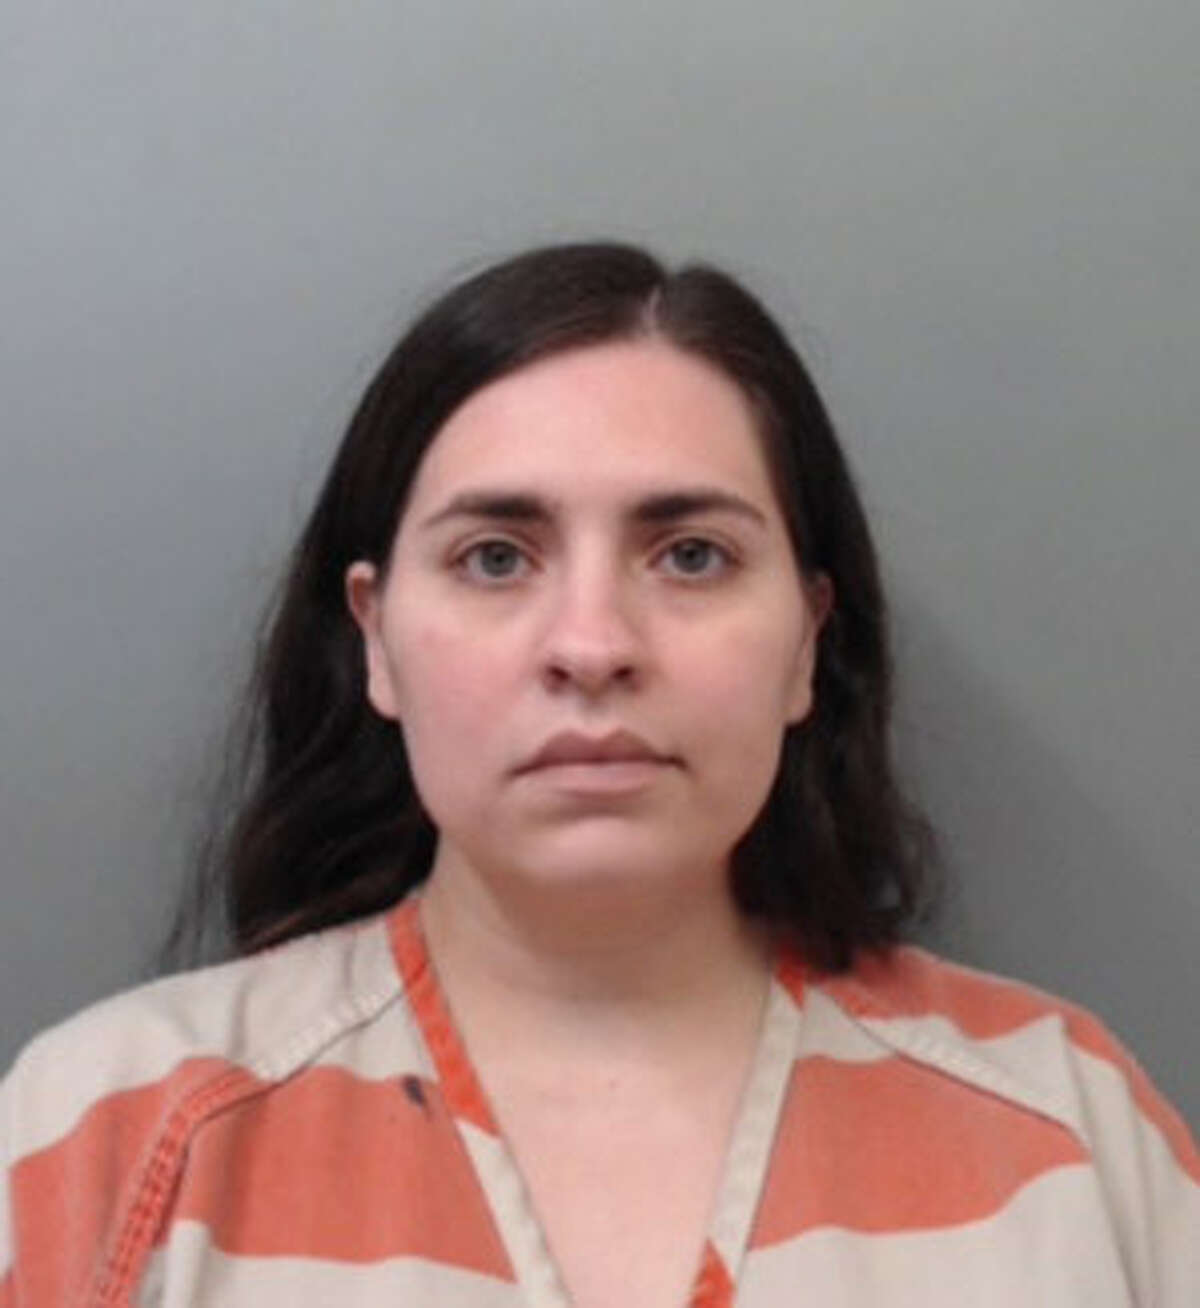 Janeth Velez, 29, was charged with injury to a child.